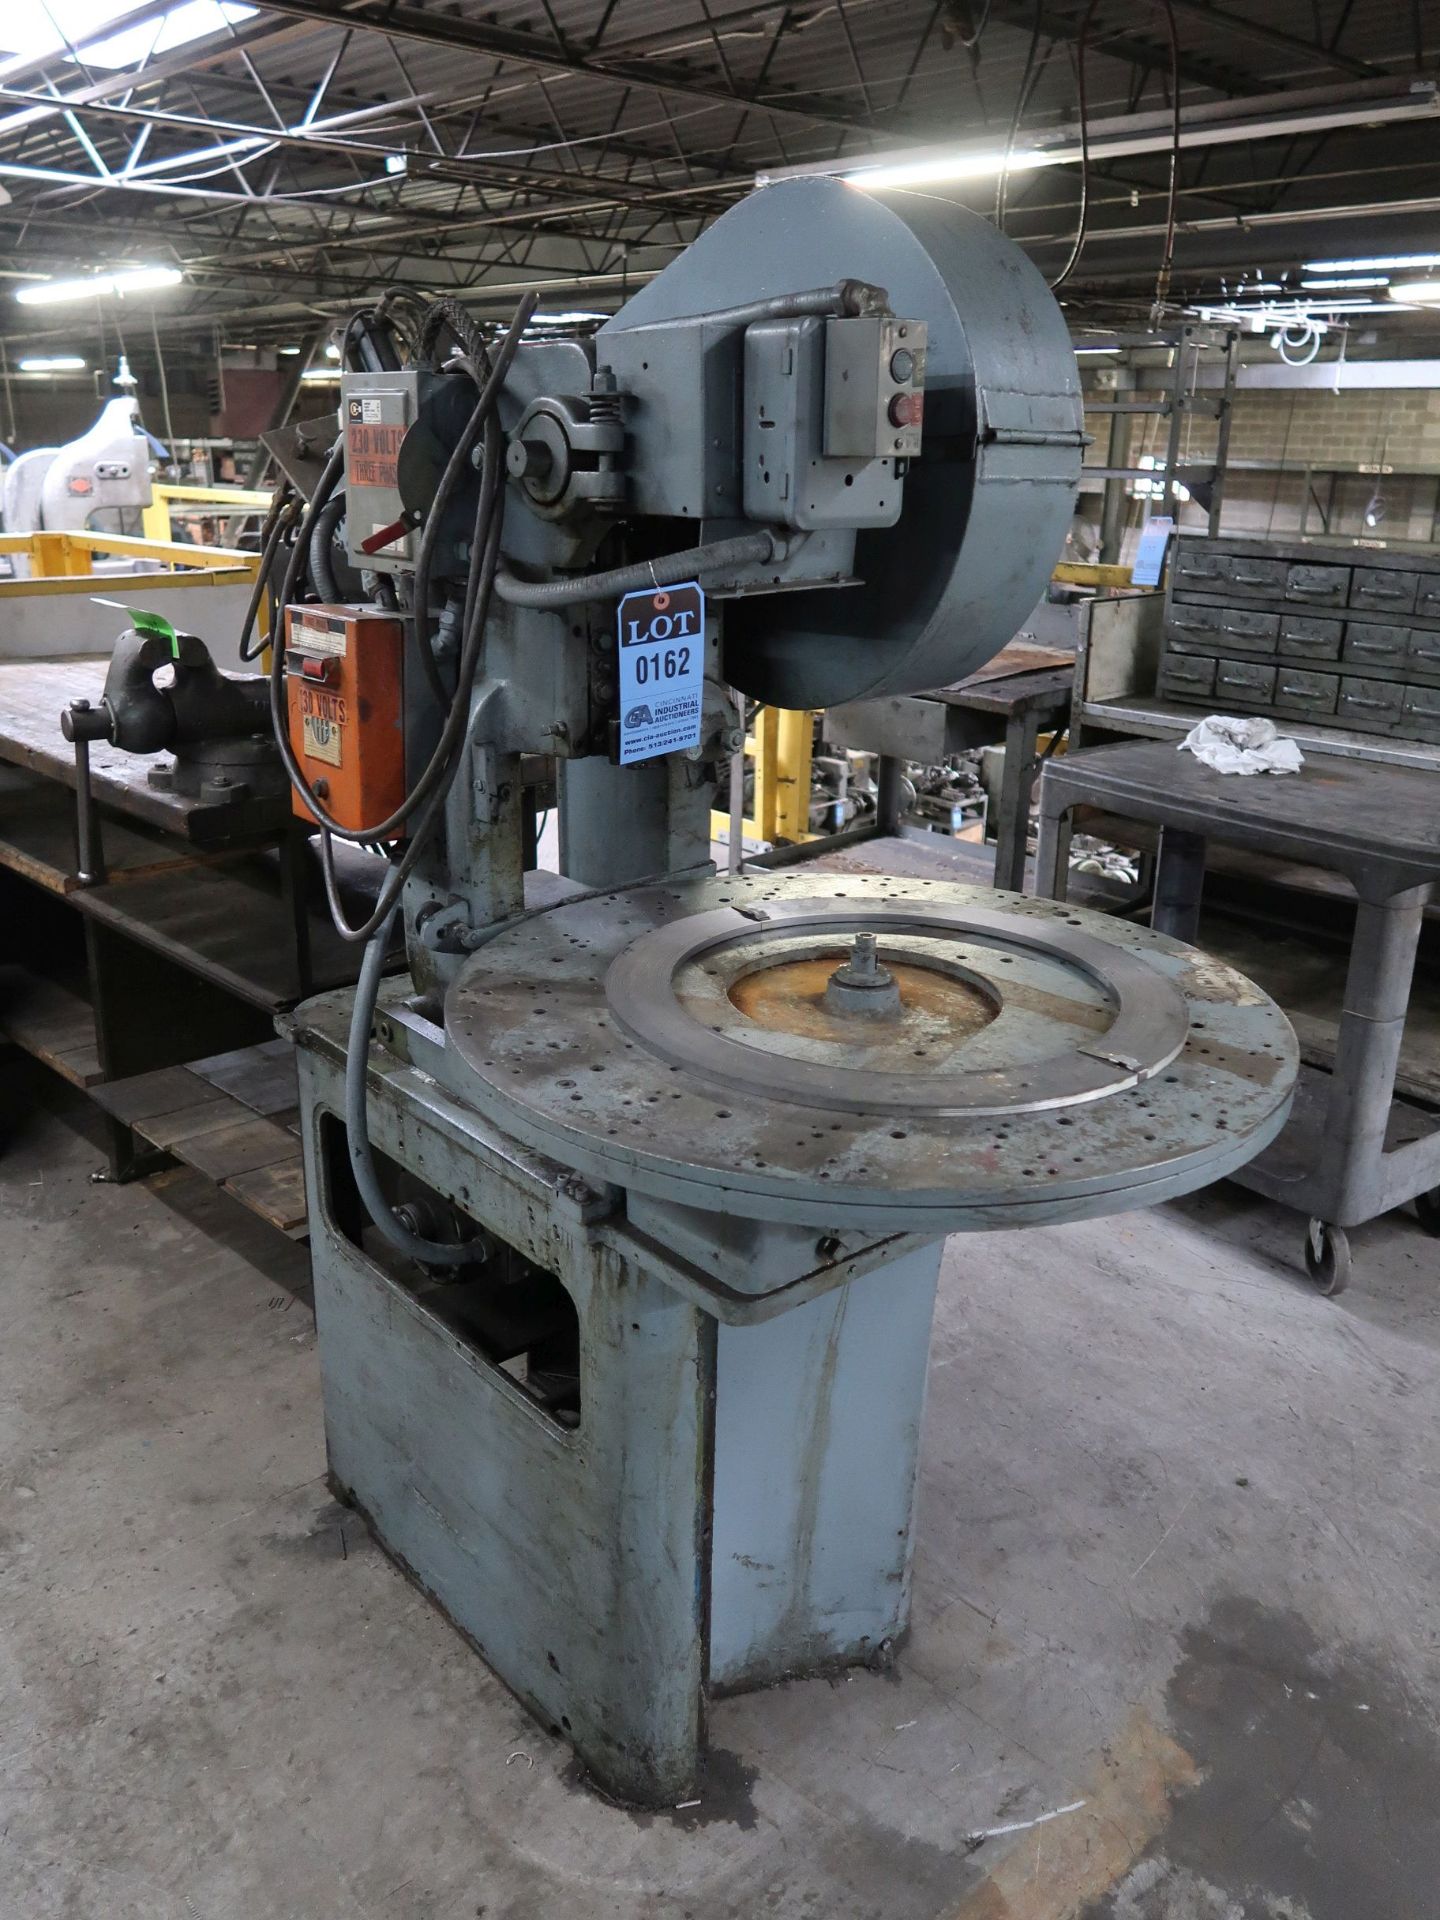 MFG UNKNOWN PUNCH PRESS WITH 30" CAROUSEL